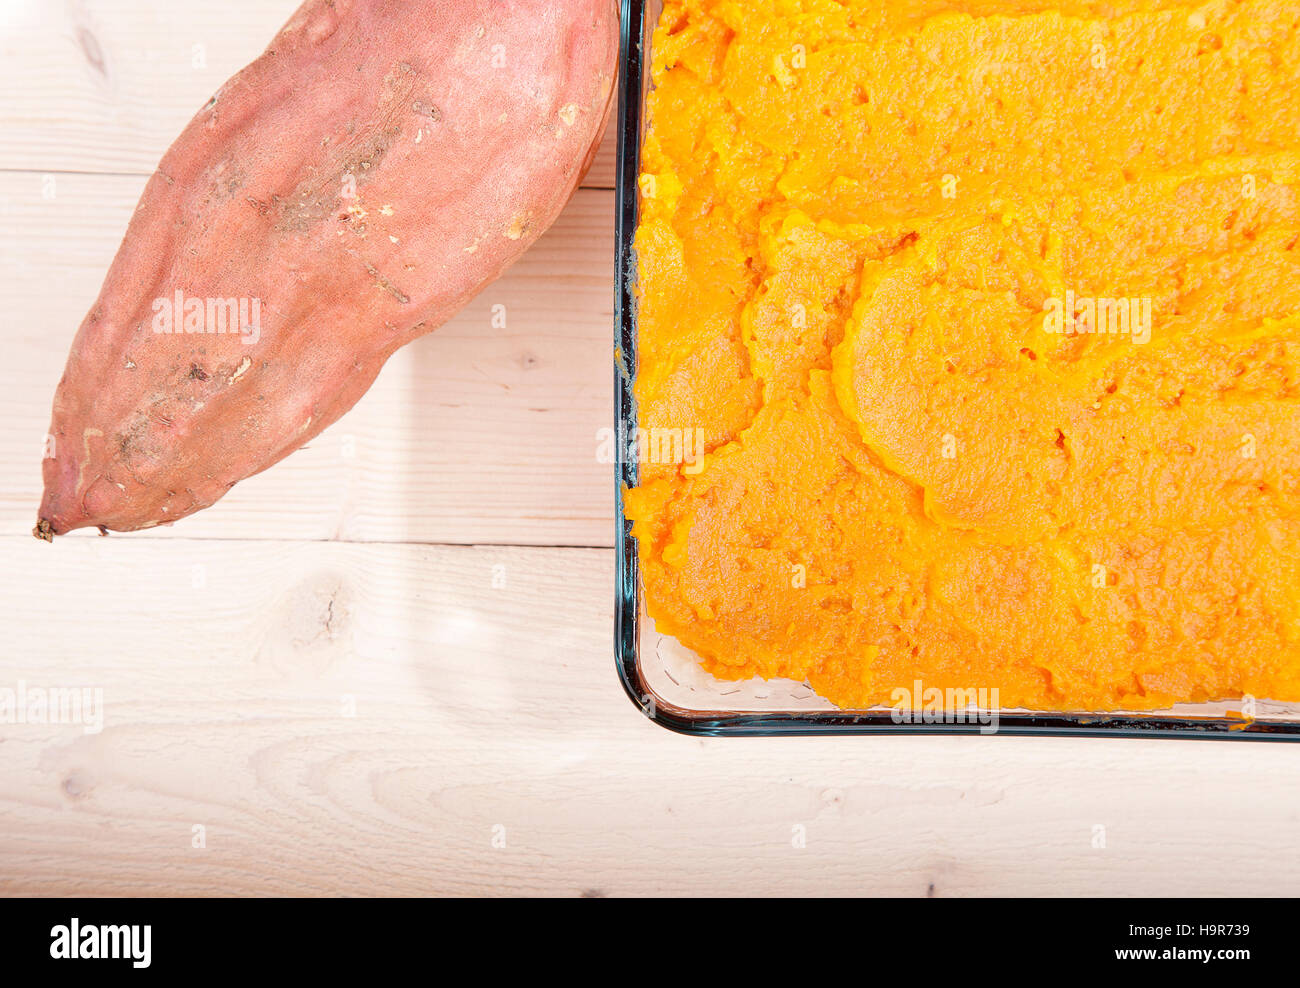 Oven meal with sauerkraut and sweet potato on wooden background Stock Photo